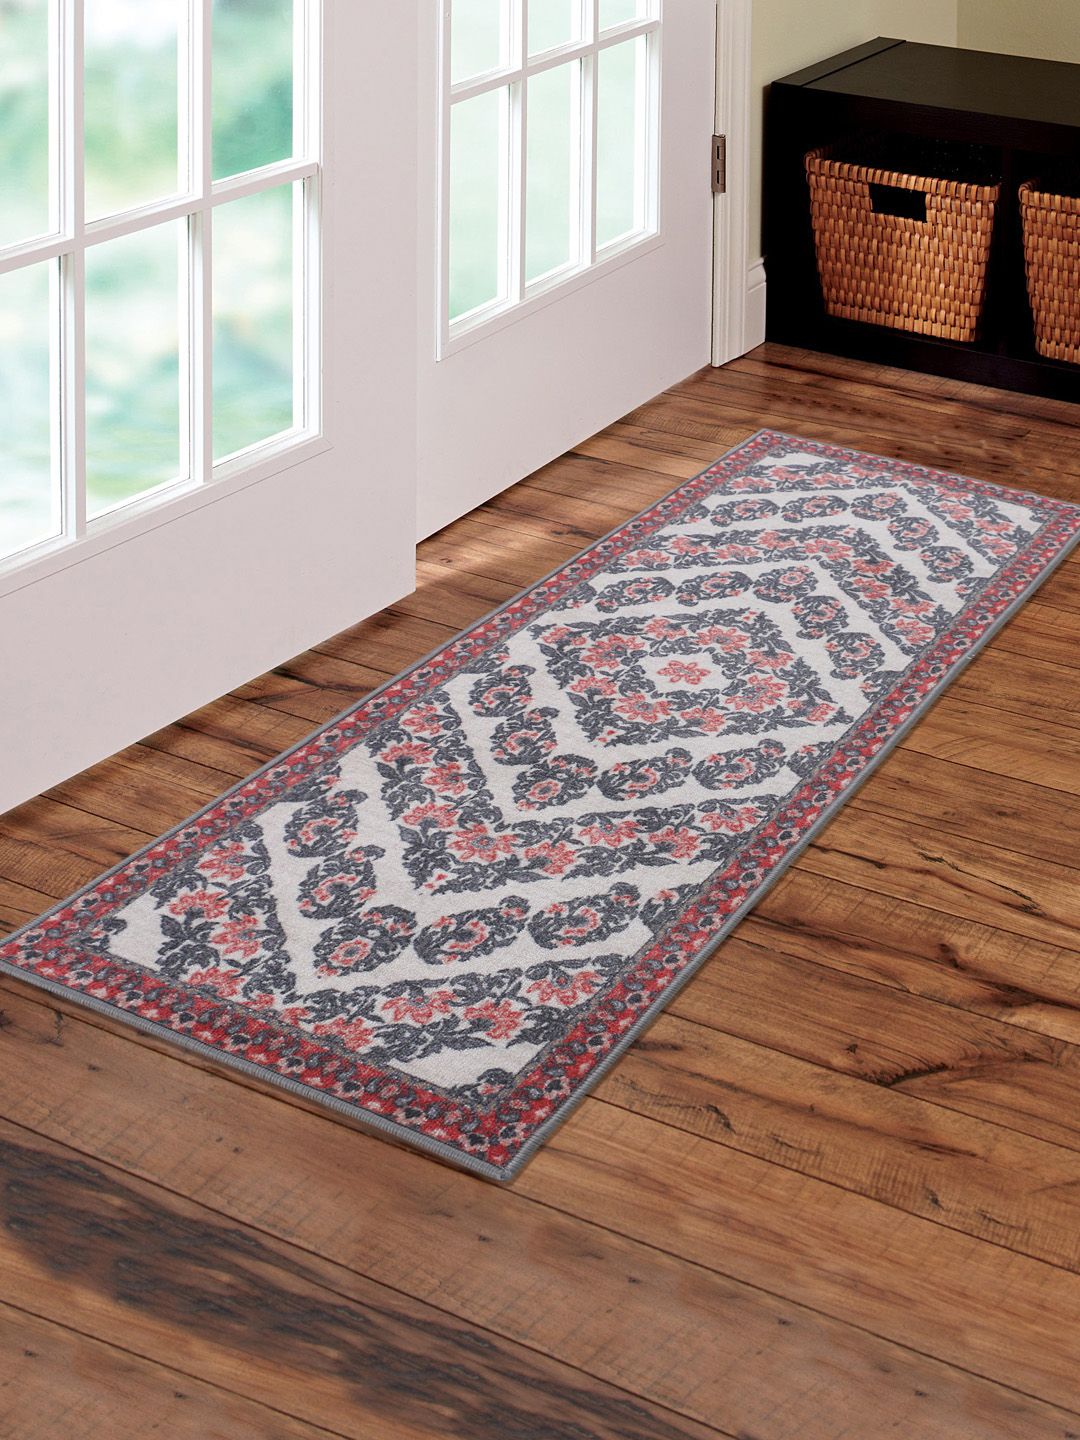 RUGSMITH Red & Grey Patterned Anti-Skid Floor Runner Price in India